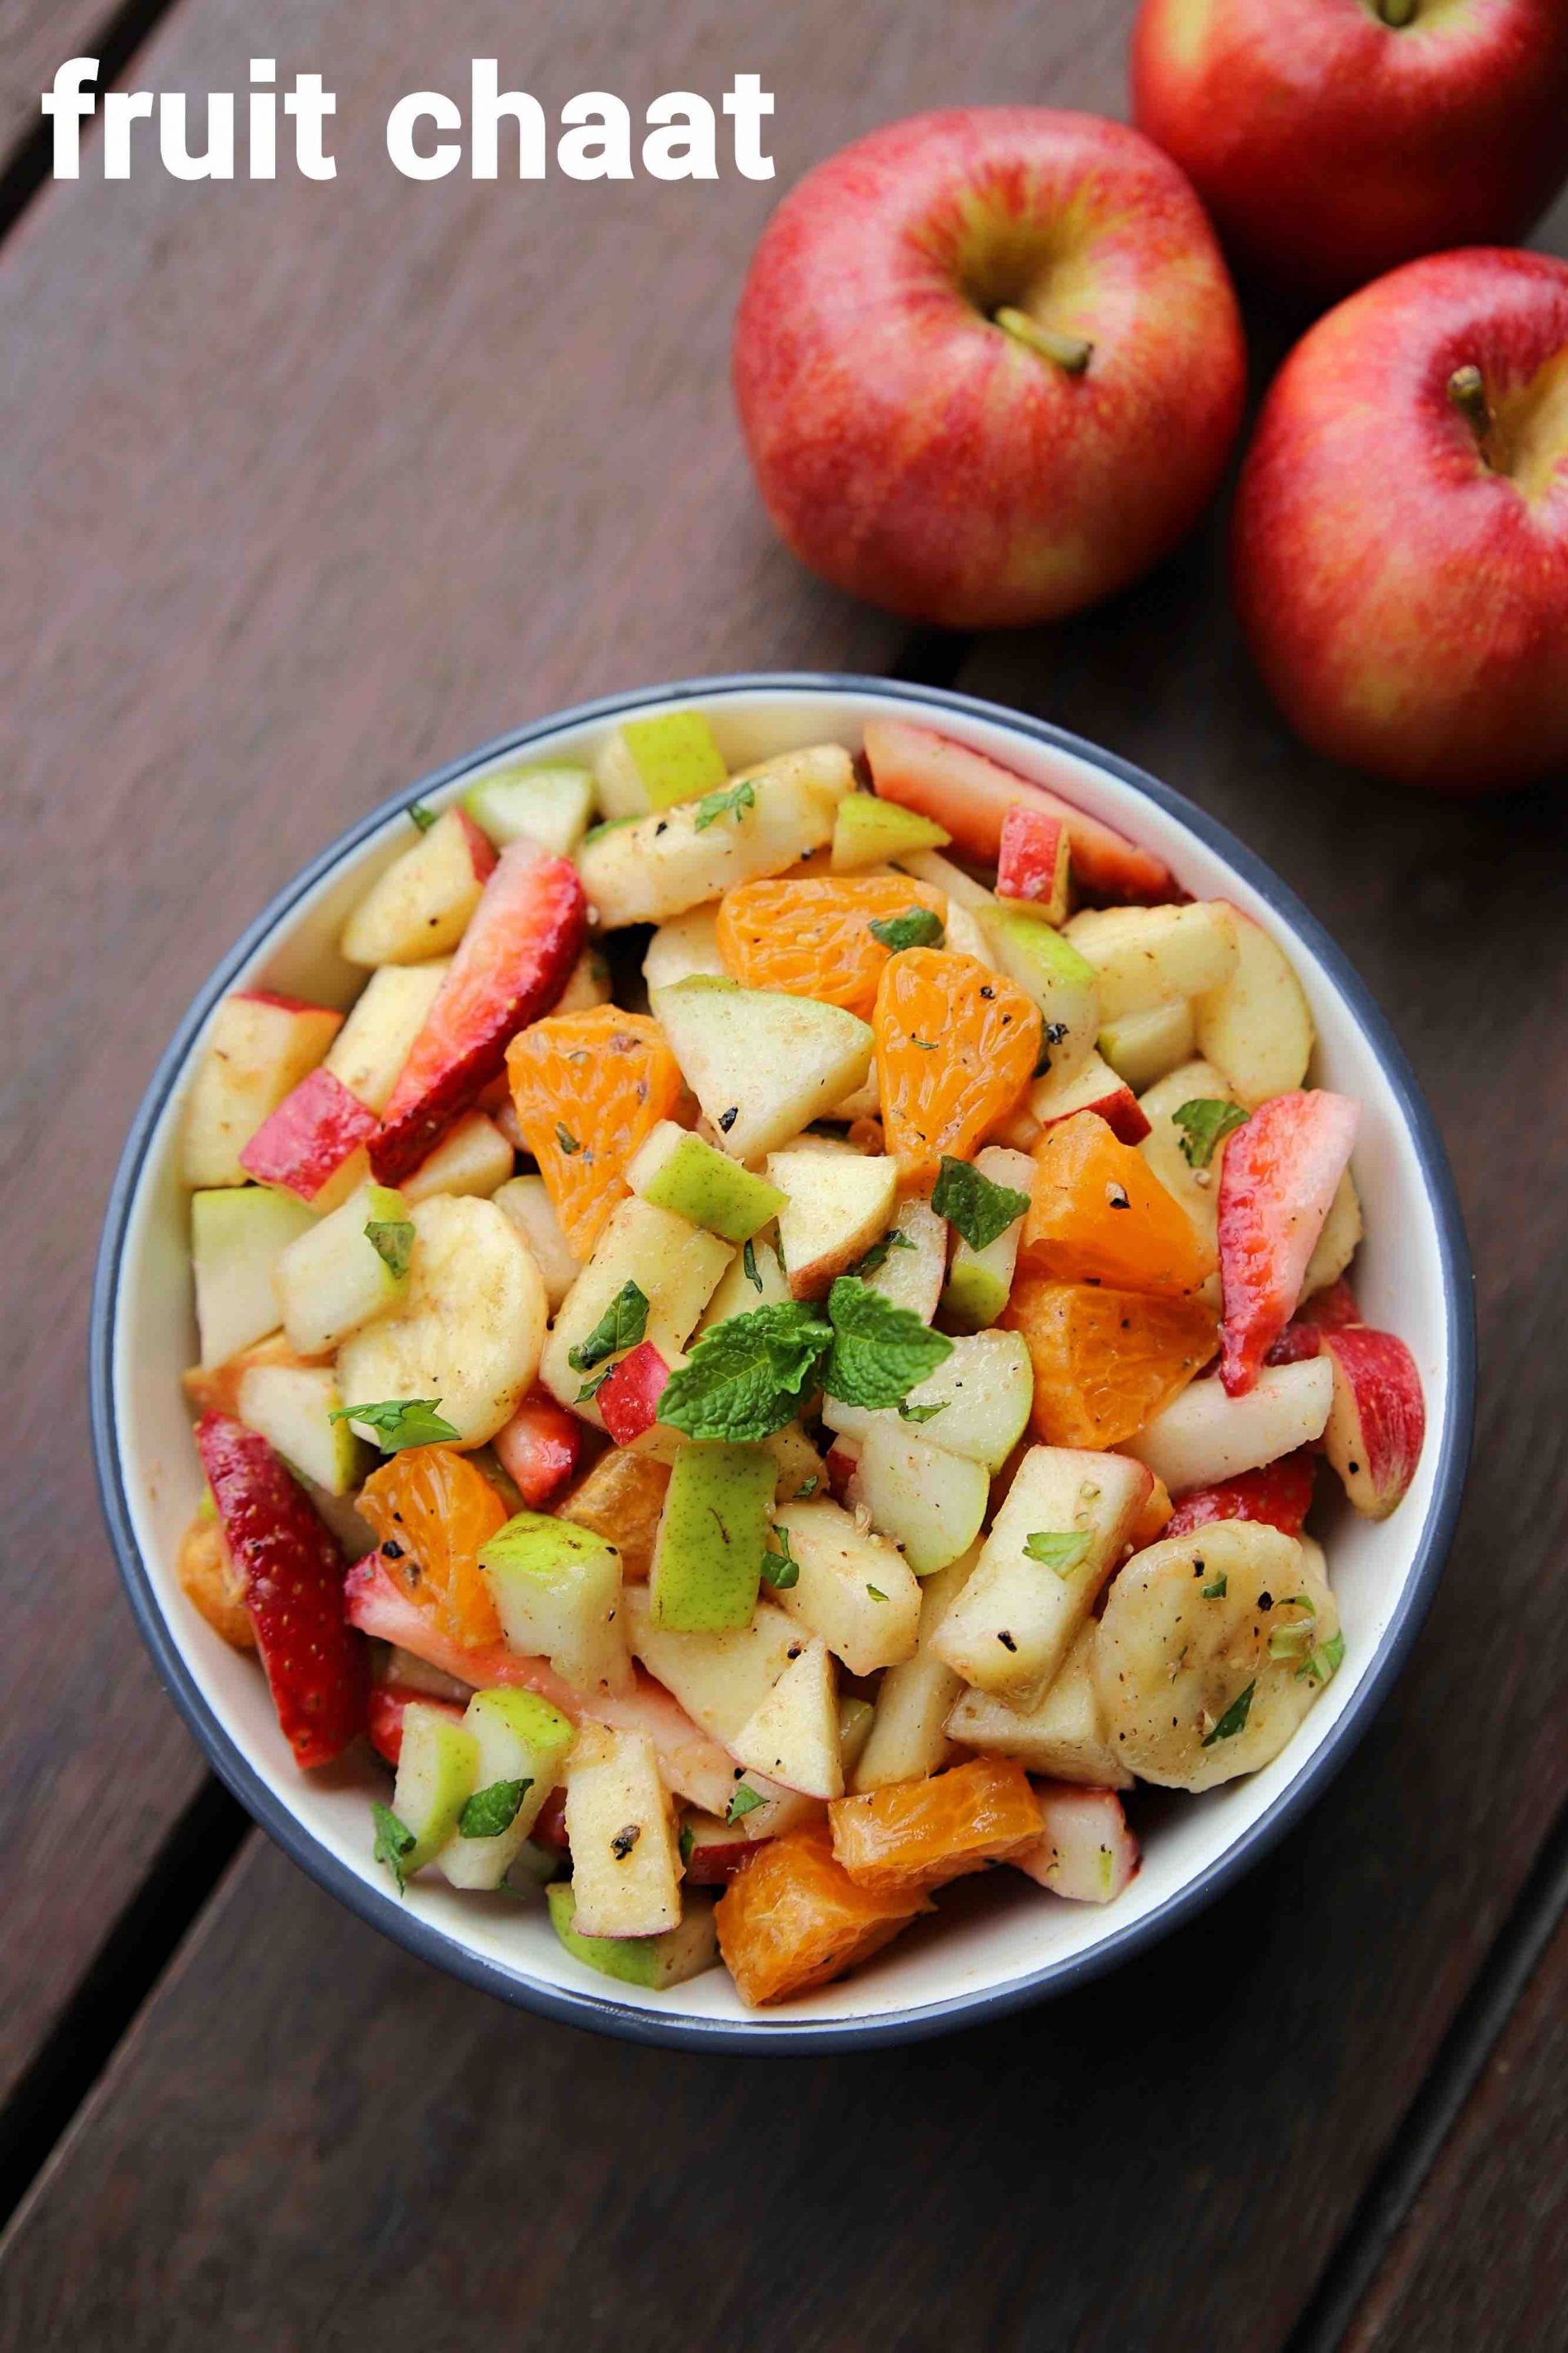 fruit chaat recipe | how to make spiced fruit chaat masala recipe